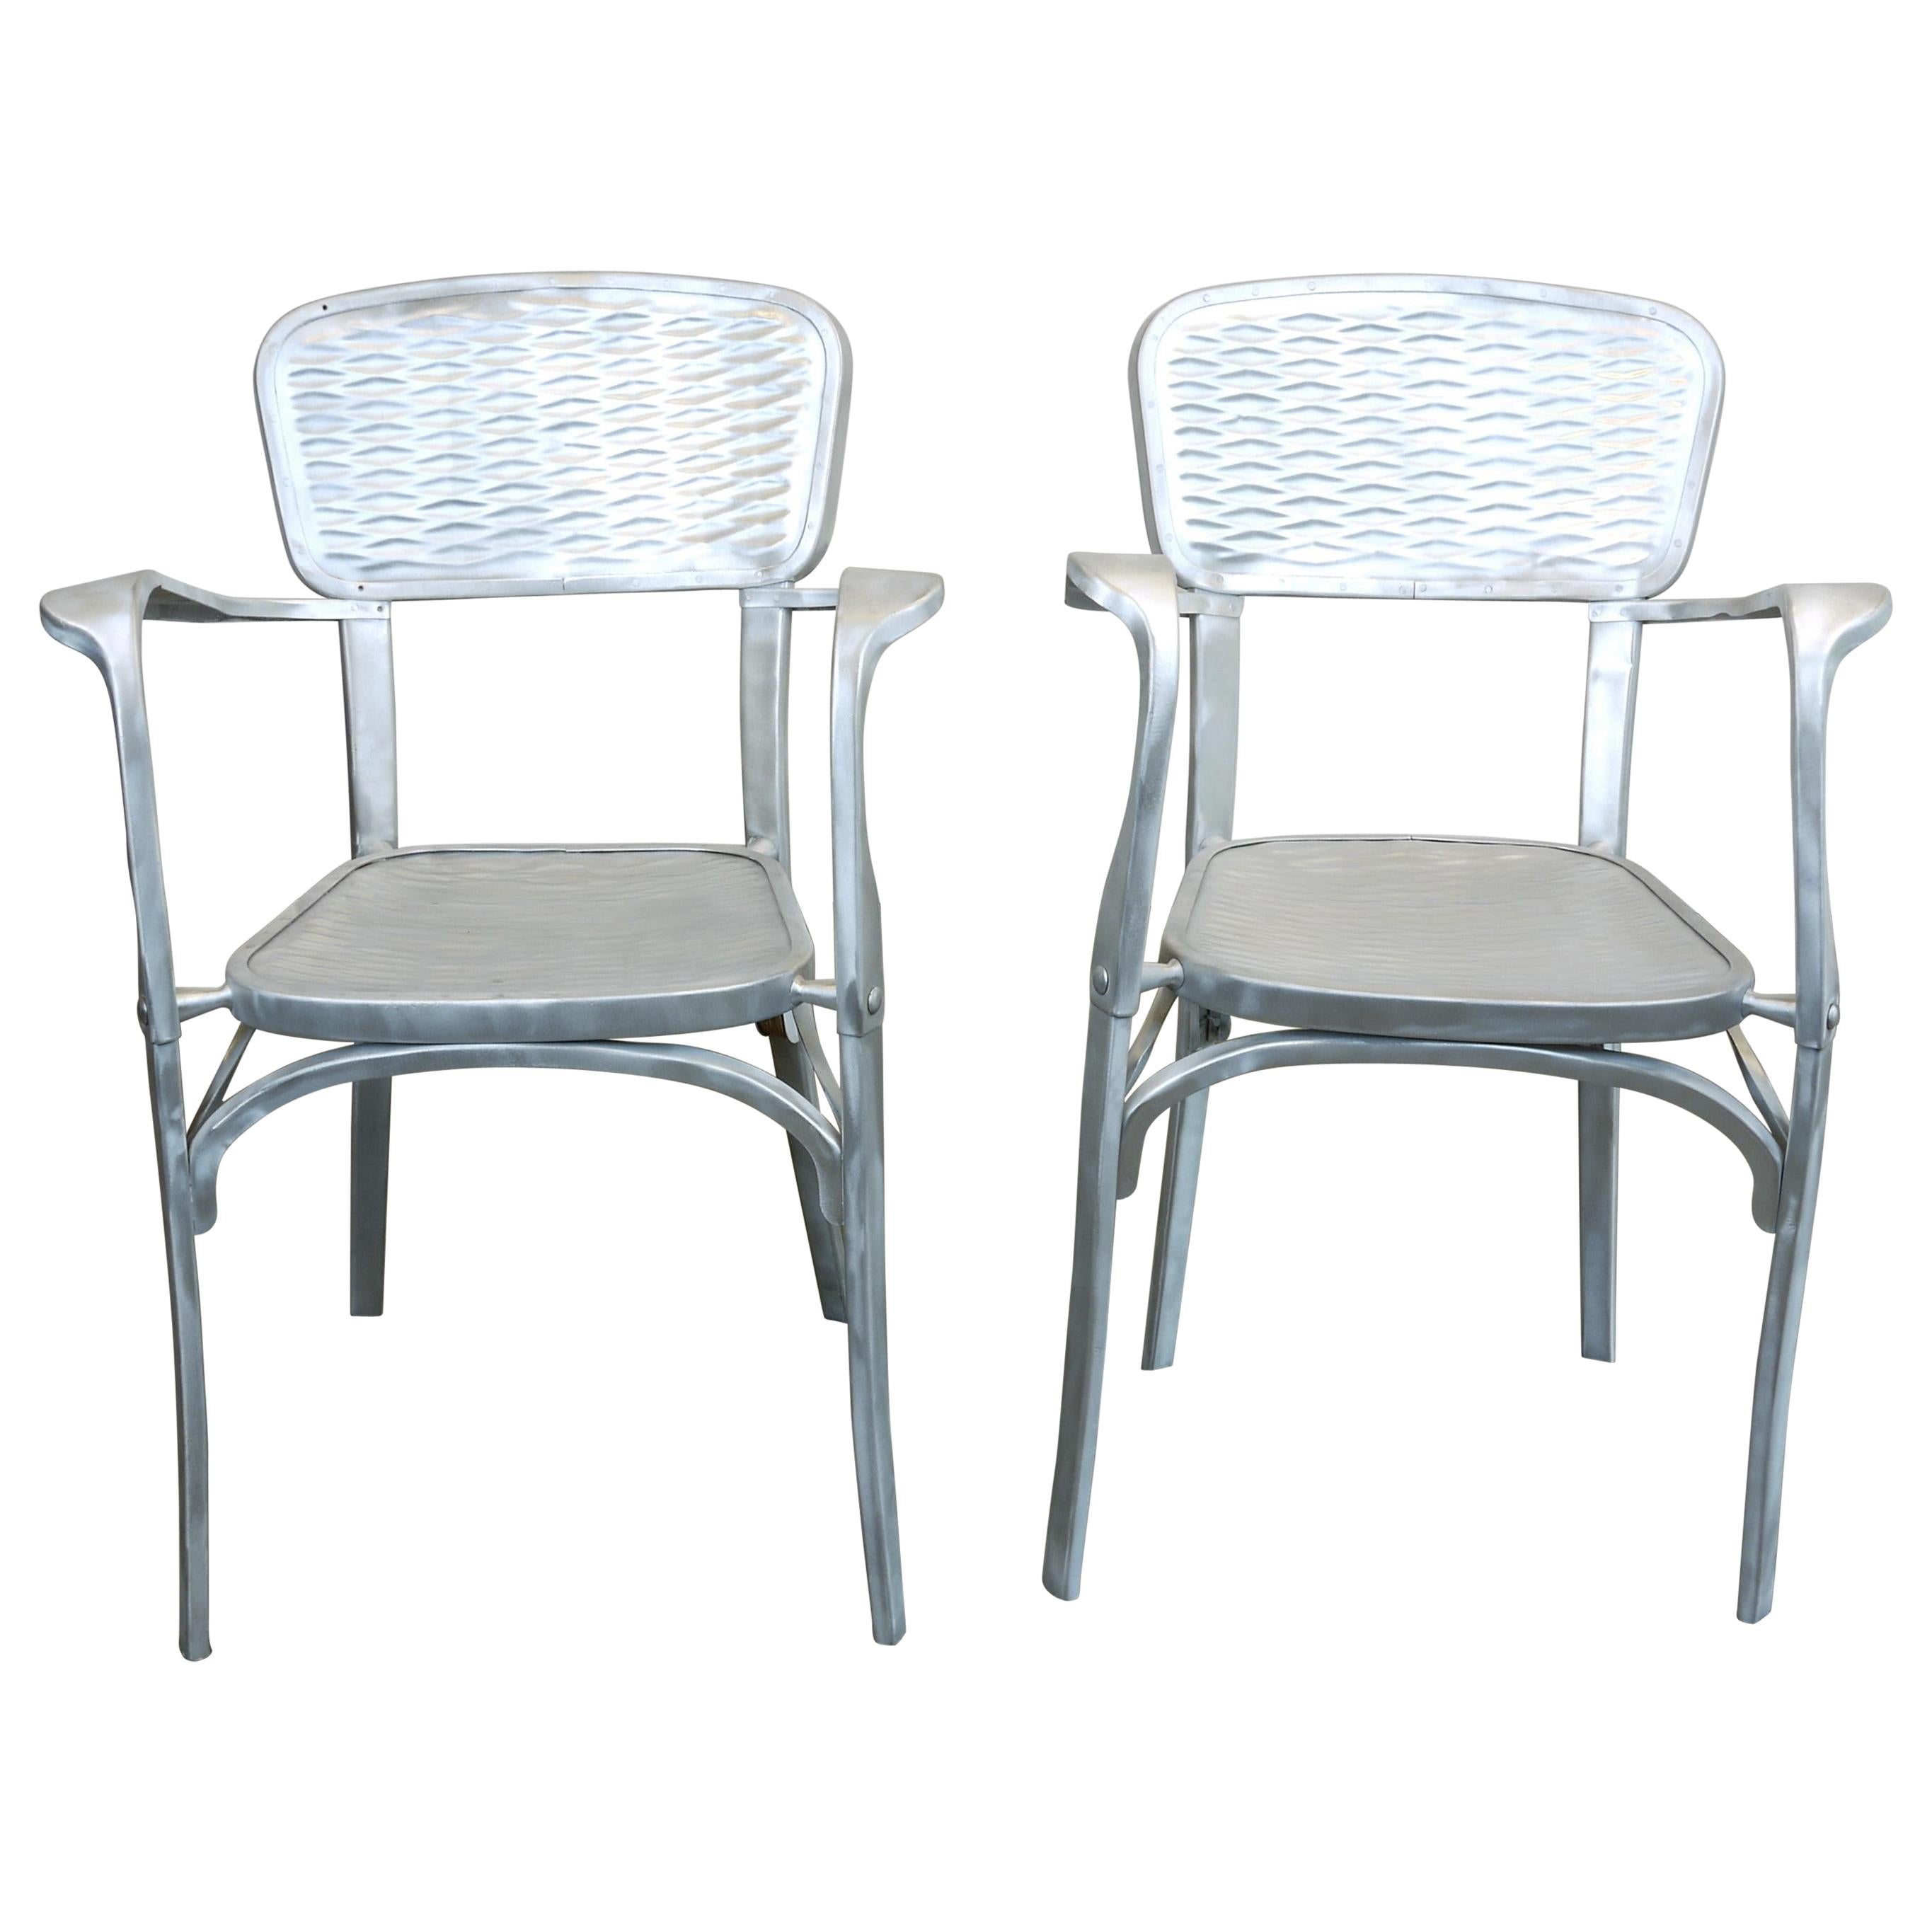 Rare Pair of 1940s French Aluminium Dining/Side Chairs